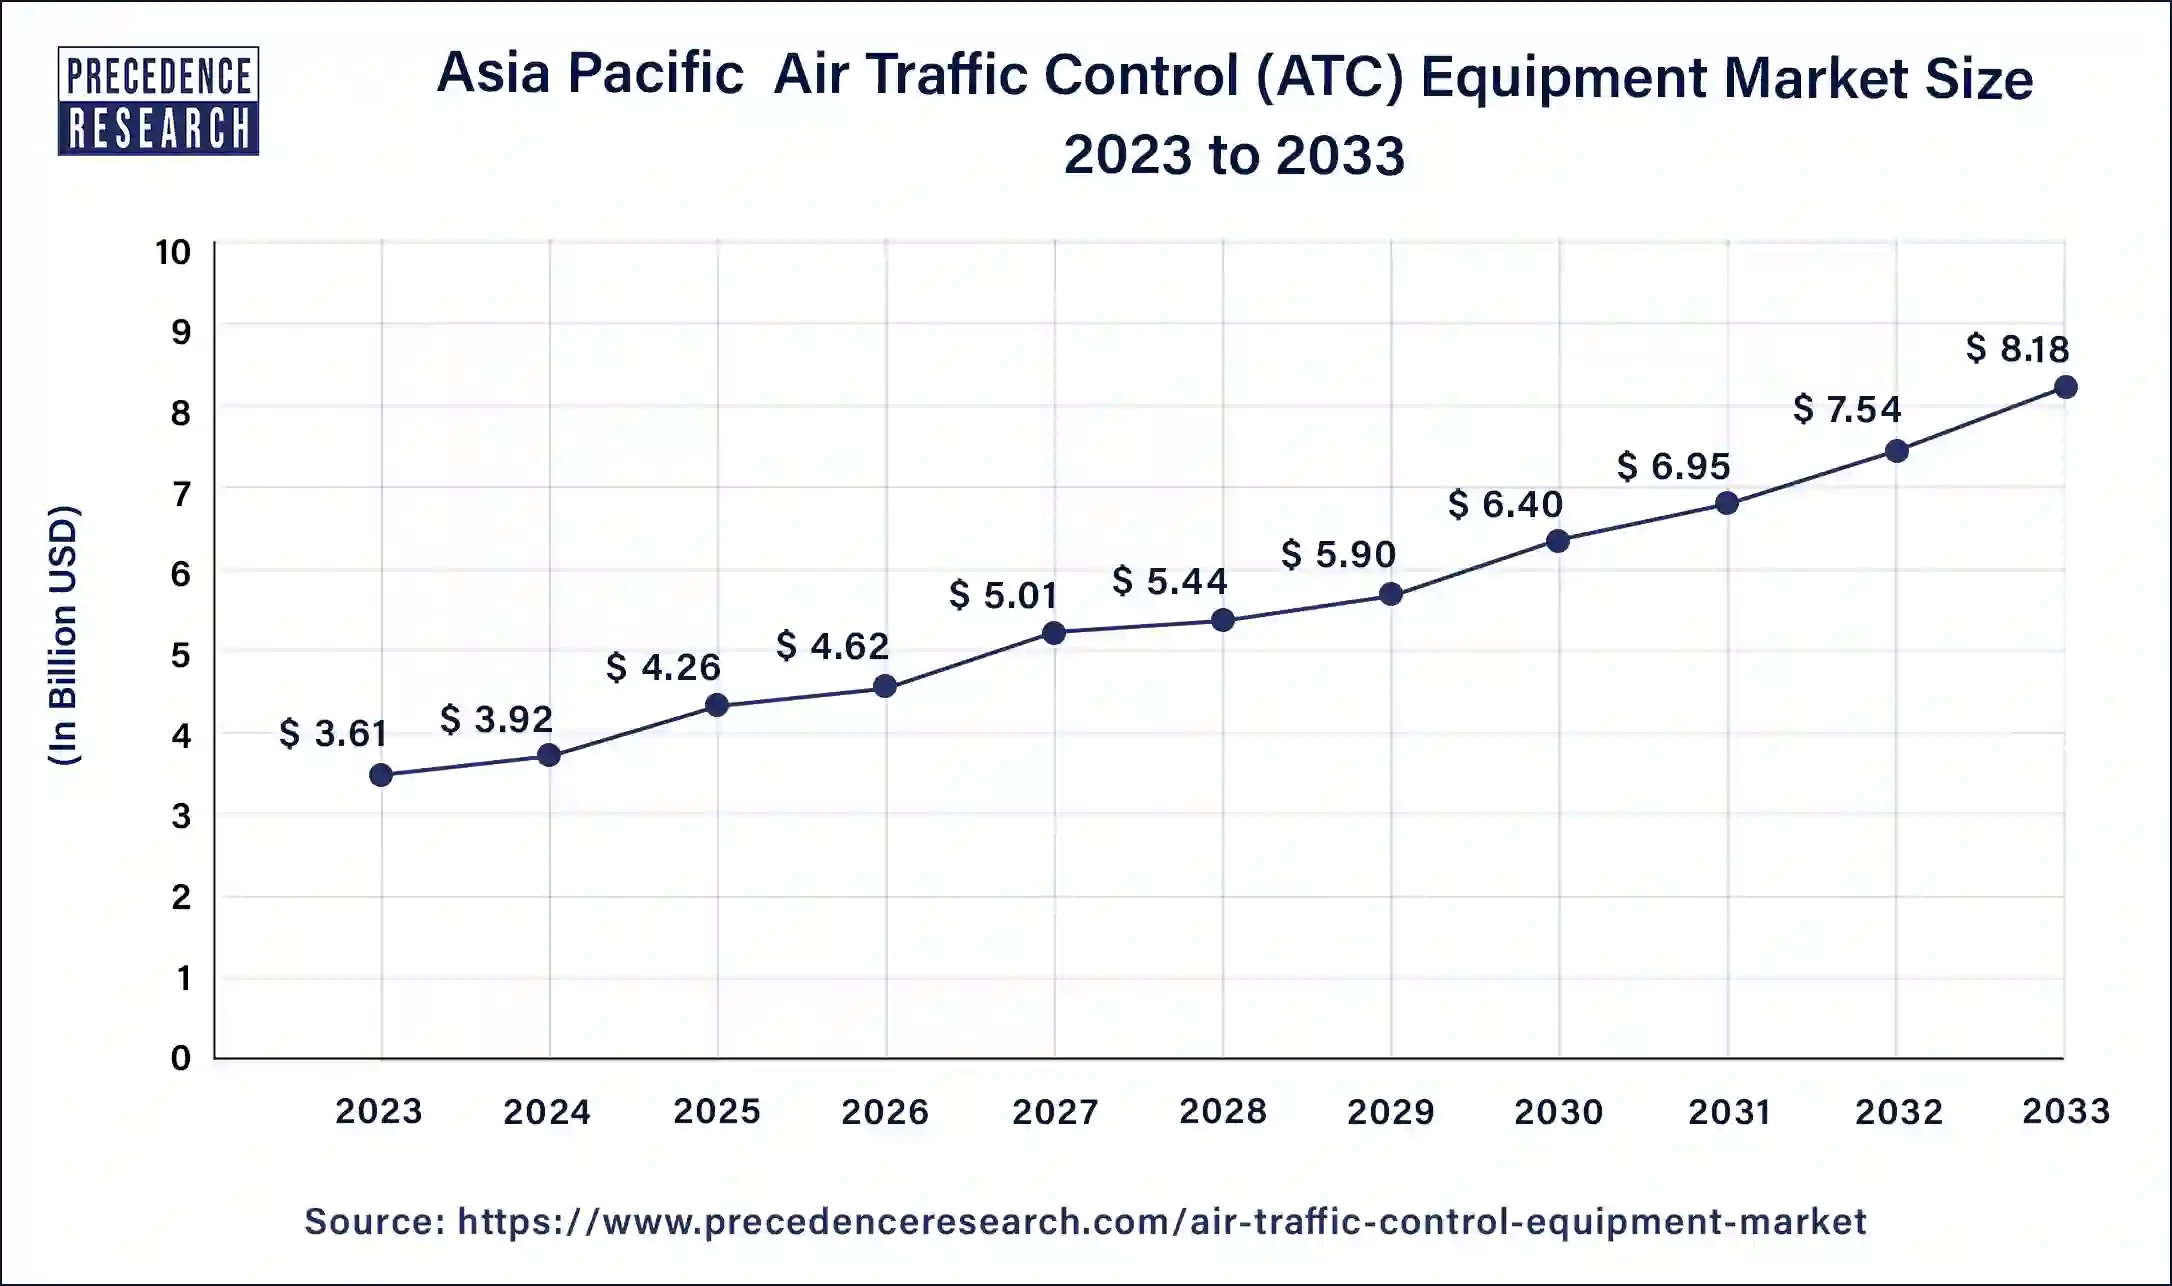 Asia Pacific Air Traffic Control (ATC) Equipment Market Size 2024 to 2033